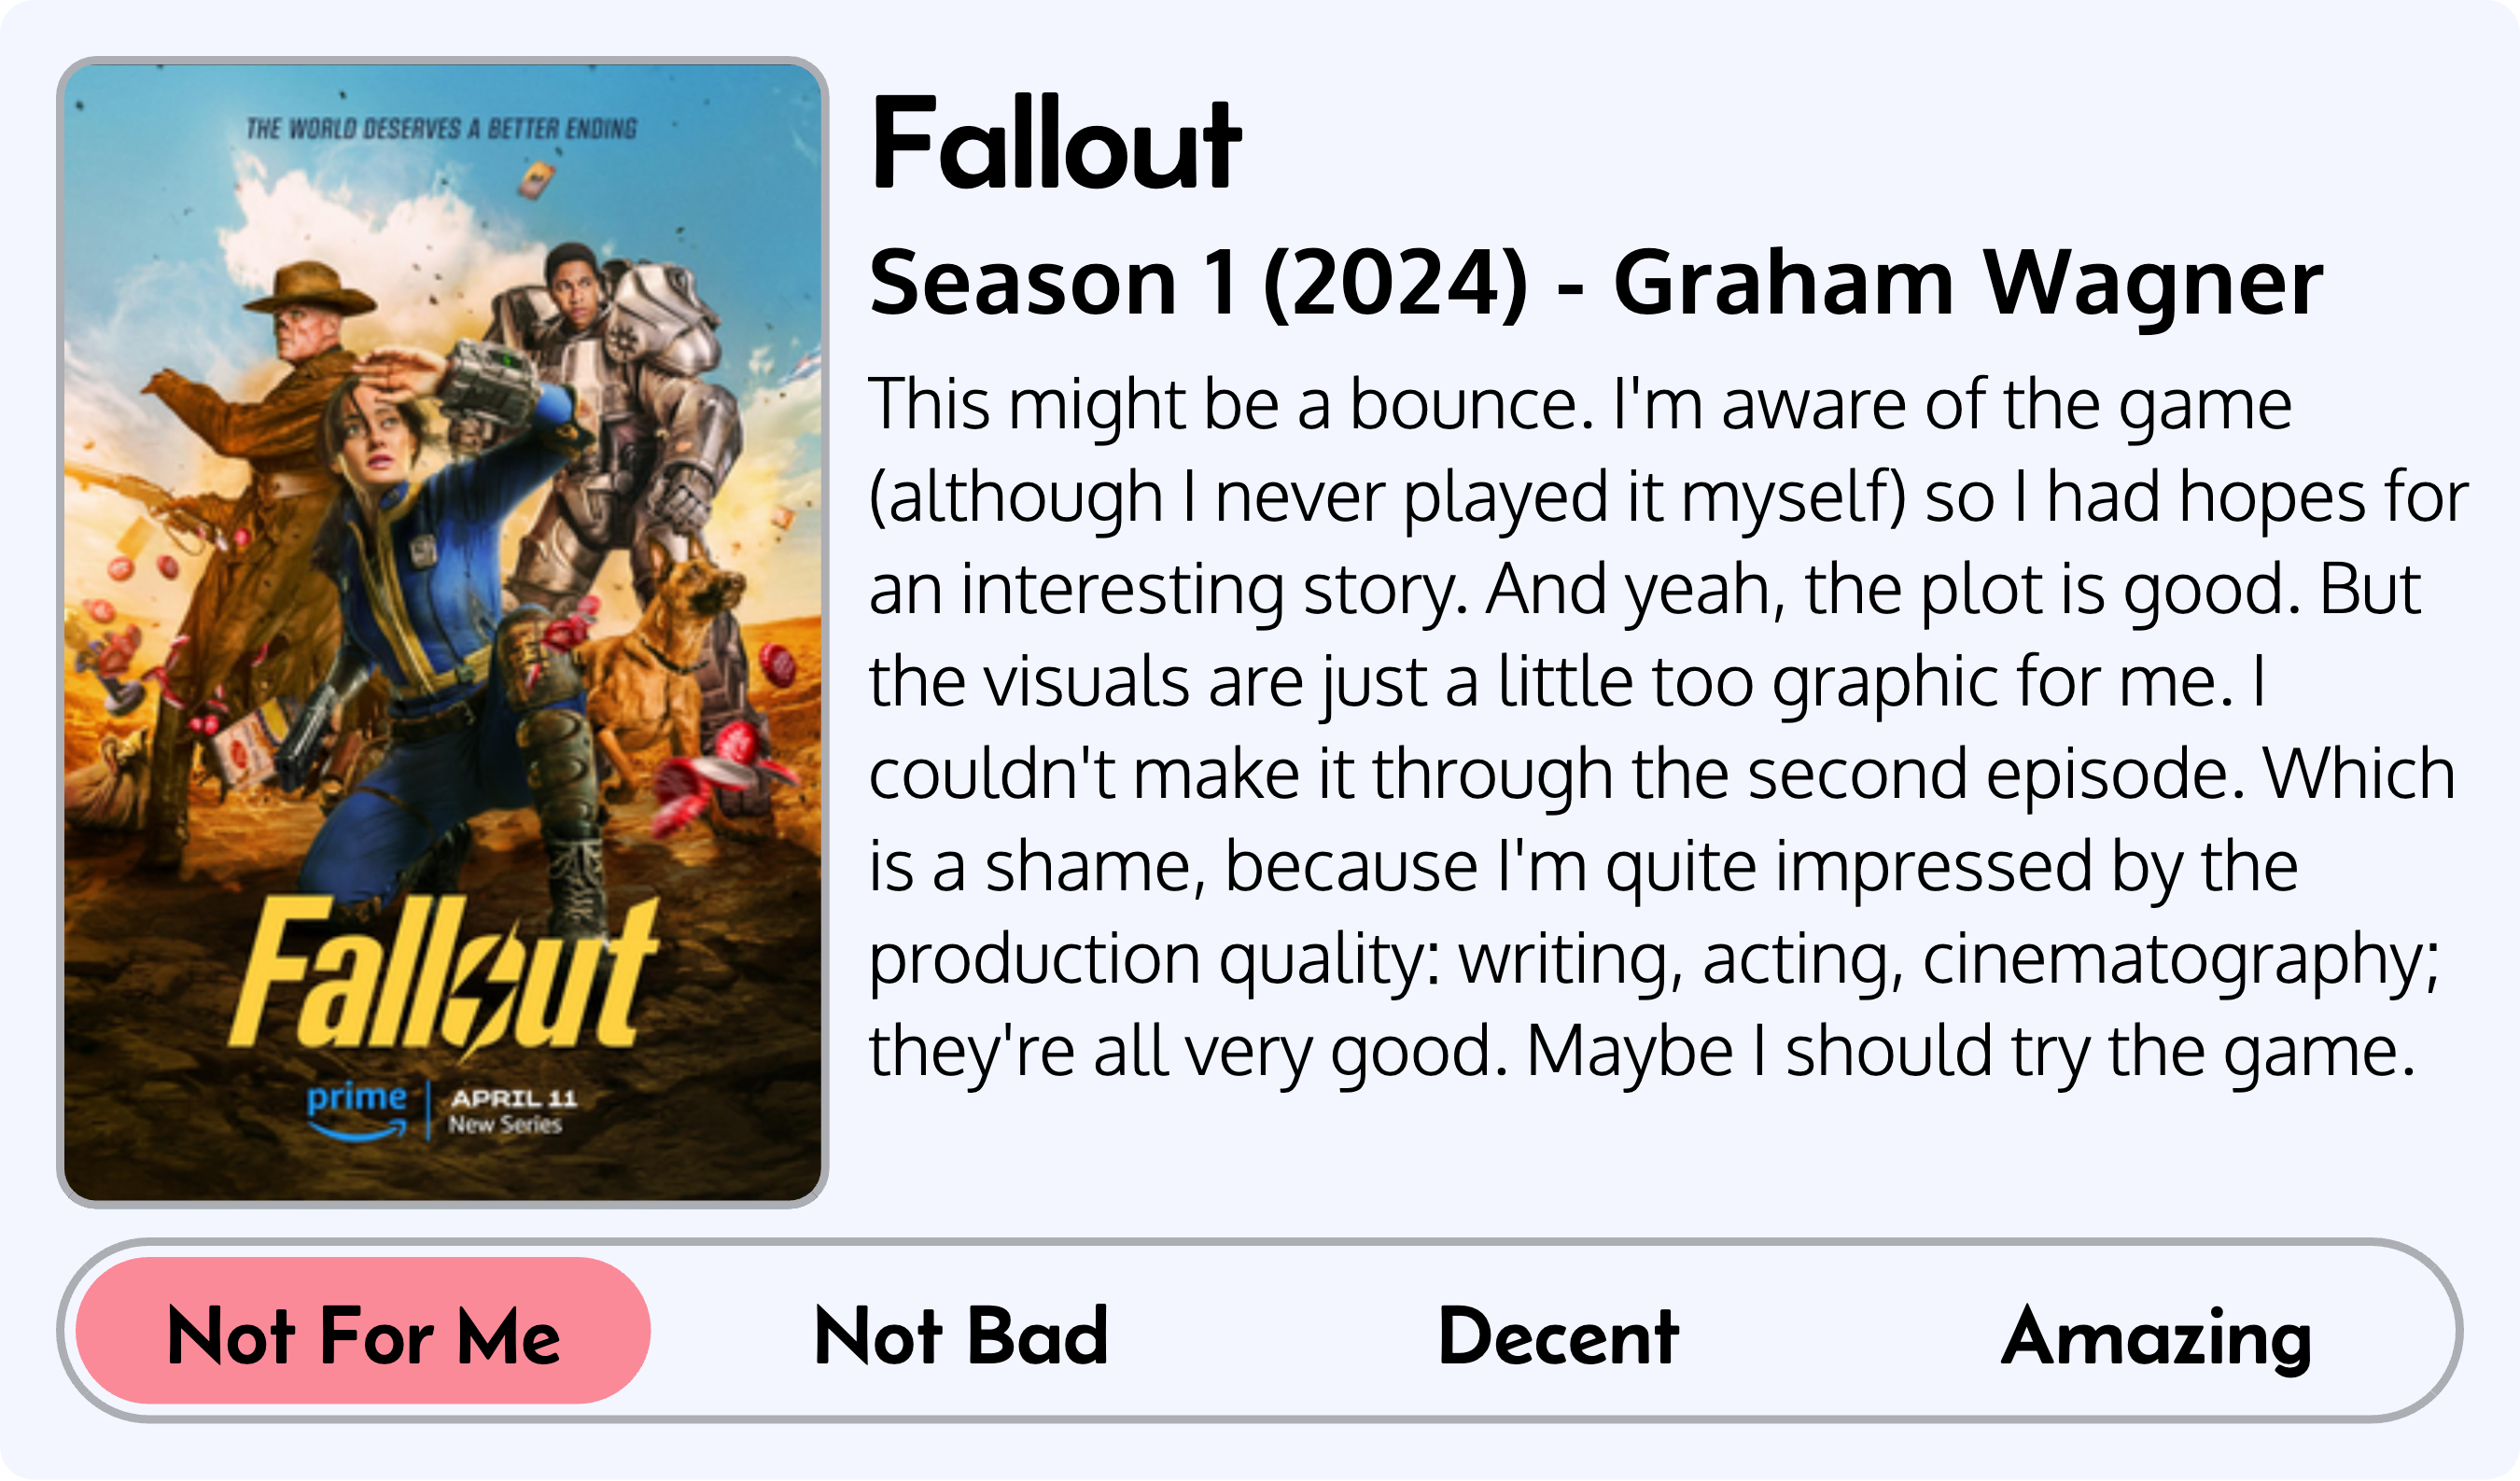 Quick review of Fallout: Series 1 (2024), by Graham Wagner. Score: Not For Me. This might be a bounce. I'm aware of the game (although I never played it myself) so I had hopes for an interesting story. And yeah, the plot is good. But the visuals are just a little too graphic for me. I couldn't make it through the second episode. Which is a shame, because I'm quite impressed by the production quality: writing, acting, cinematography; they're all very good. Maybe I should try the game.